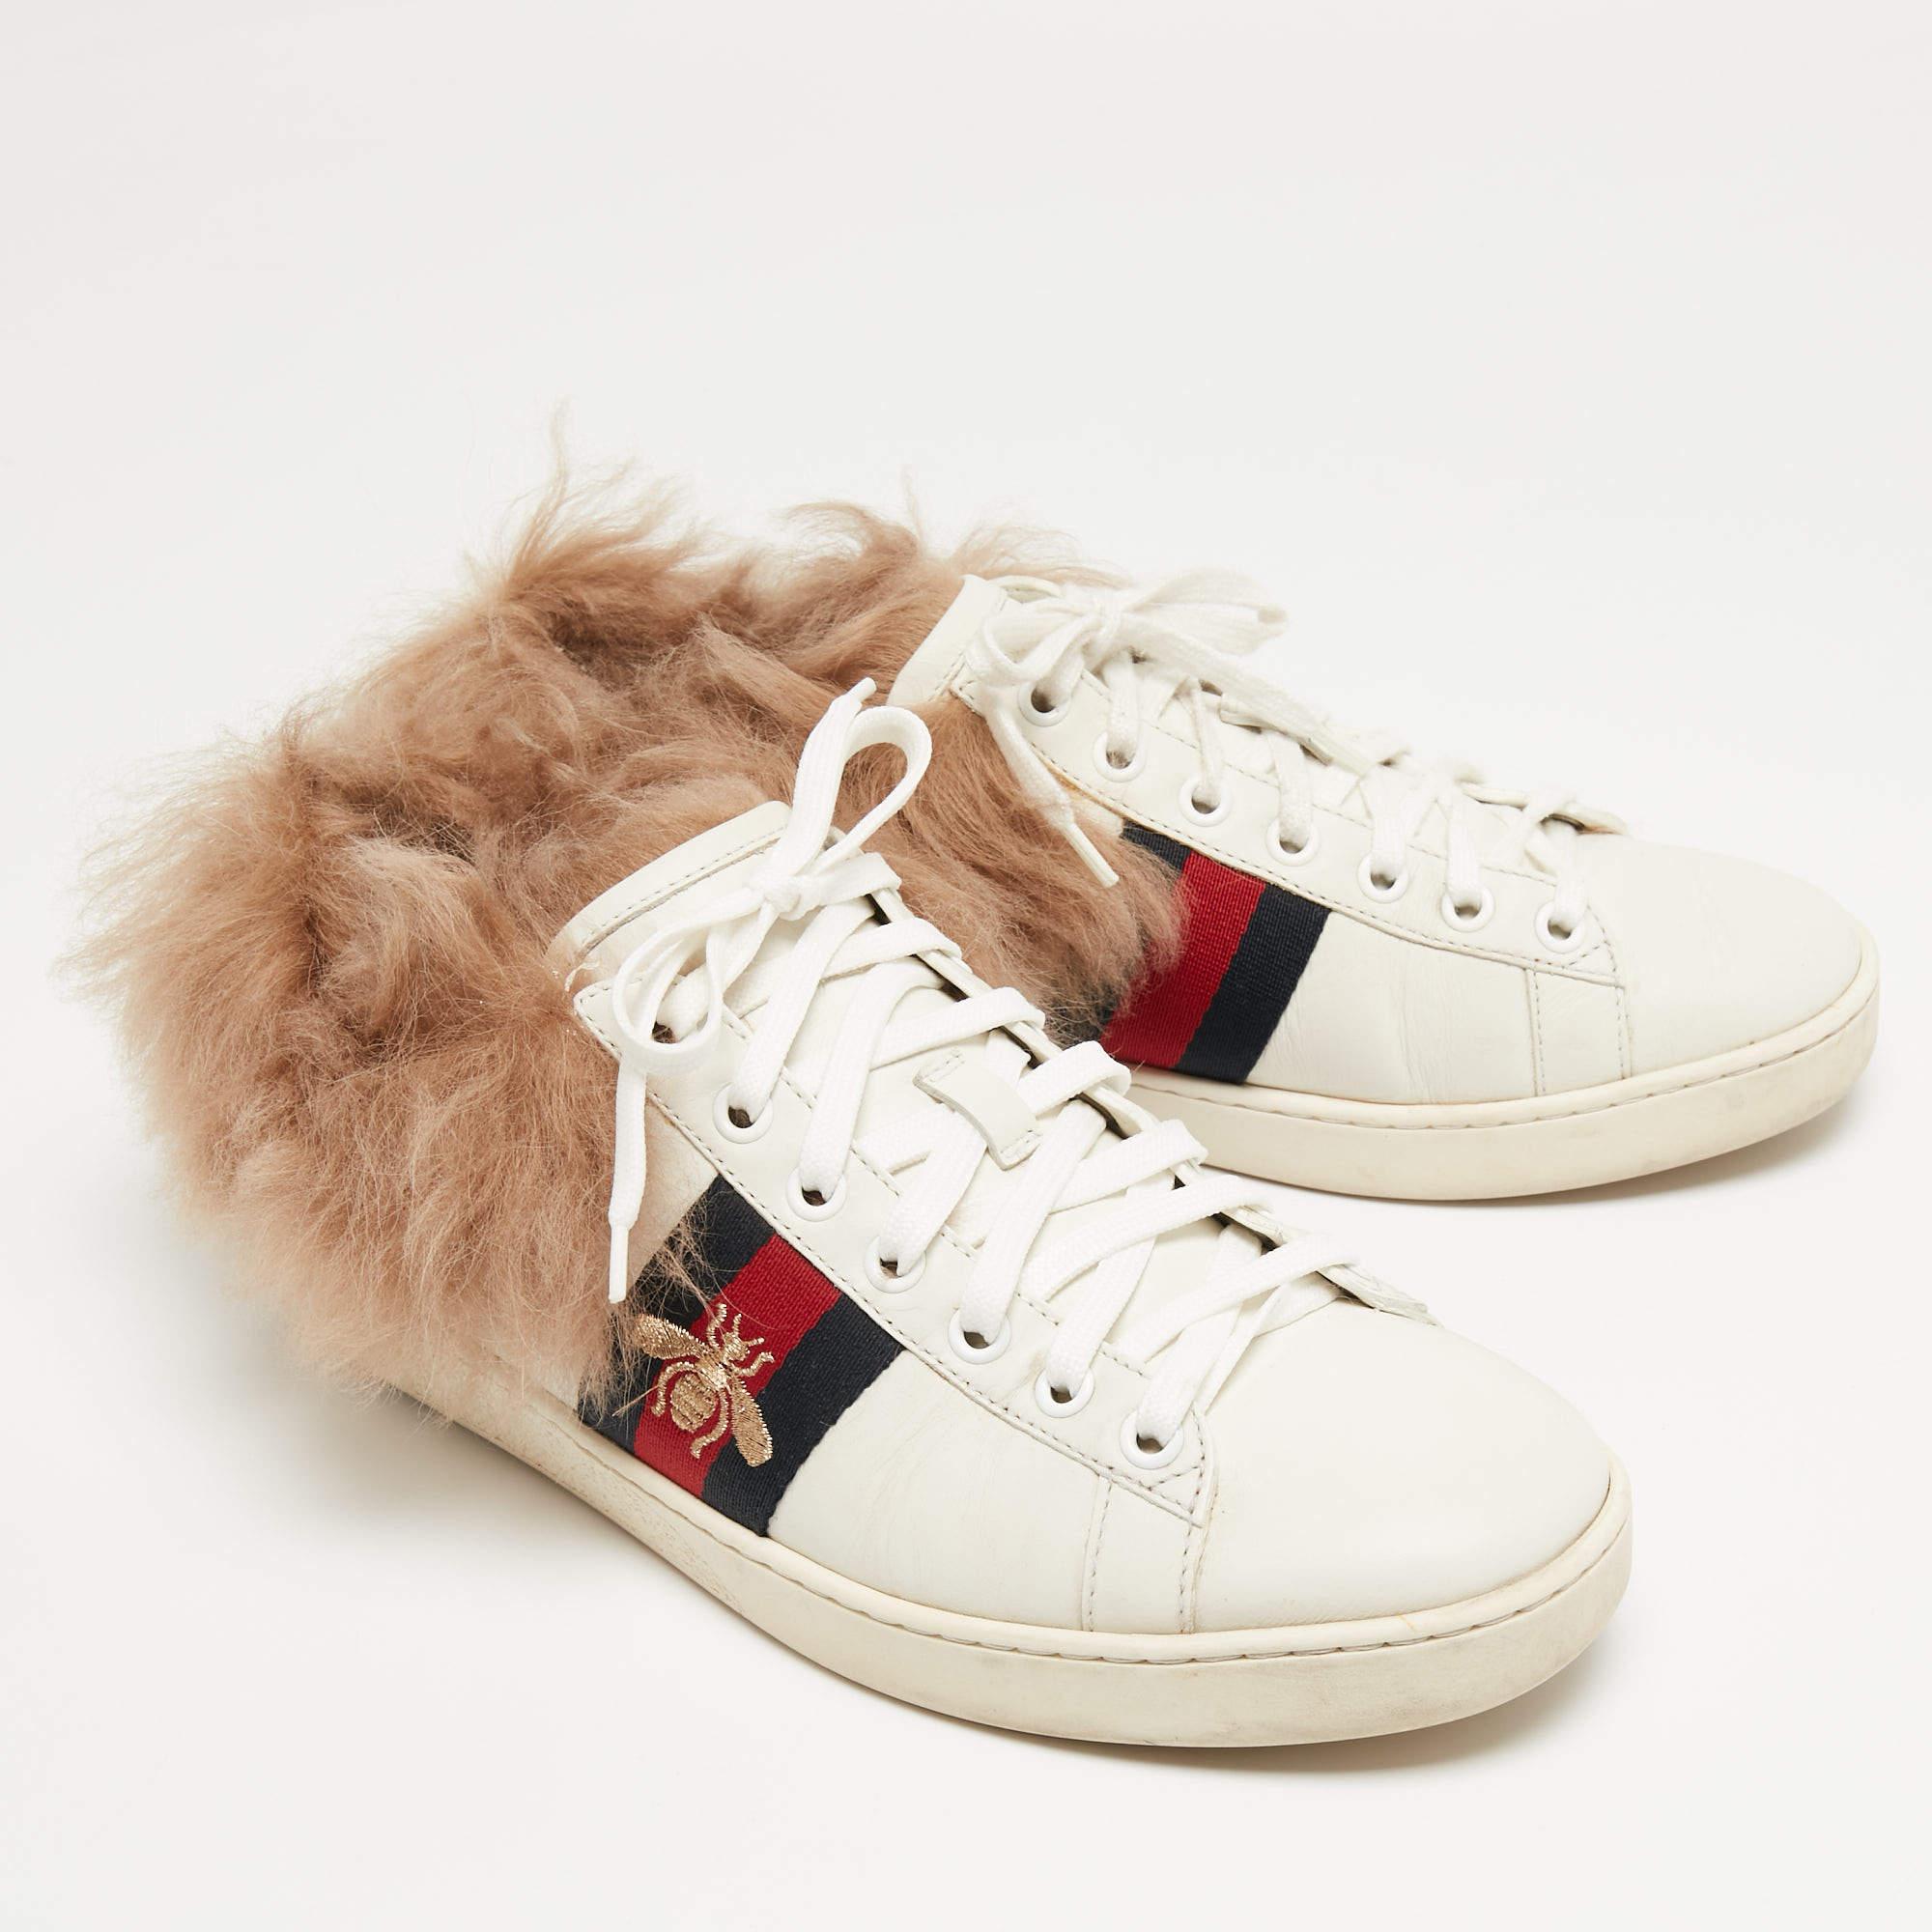 Gucci White Leather and Fur Ace Embroidered Bee Low Top Sneakers Size 37.5 In Good Condition For Sale In Dubai, Al Qouz 2